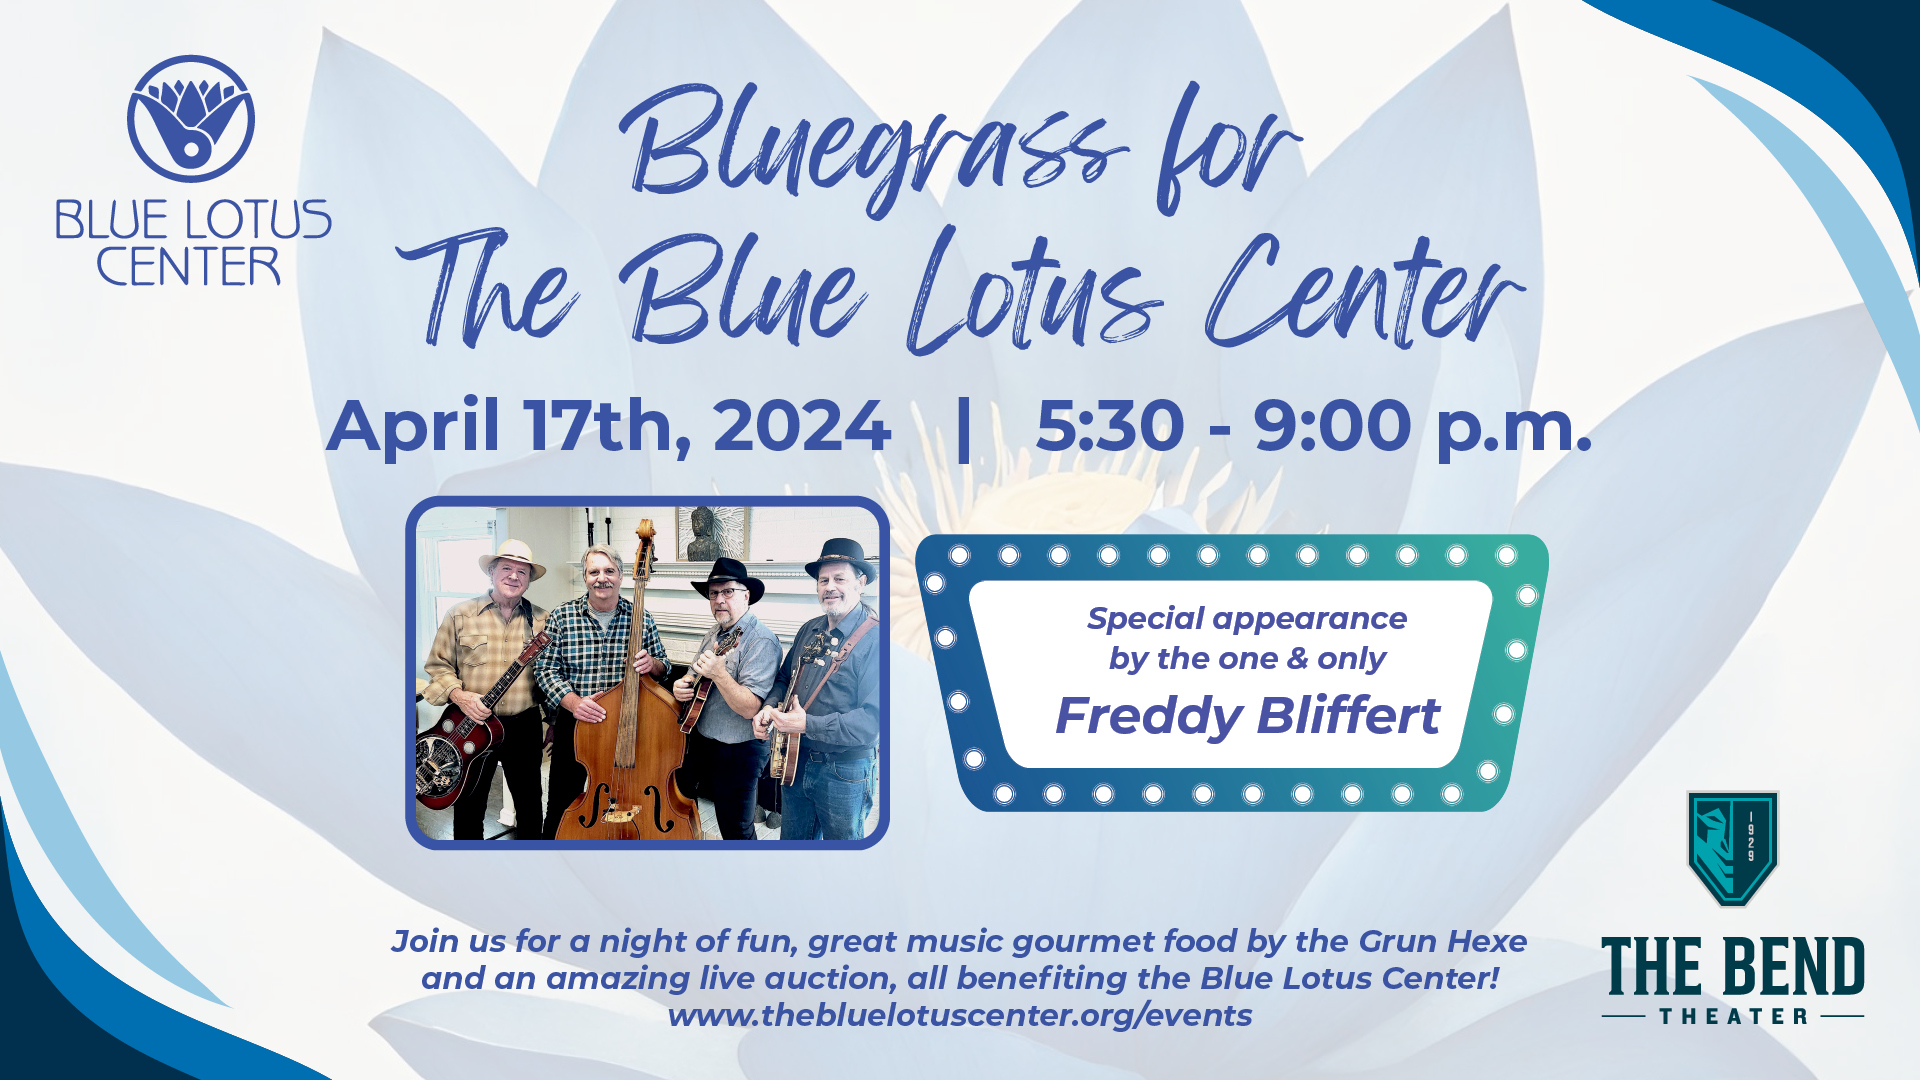 Bluegrass for The Blue Lotus Center